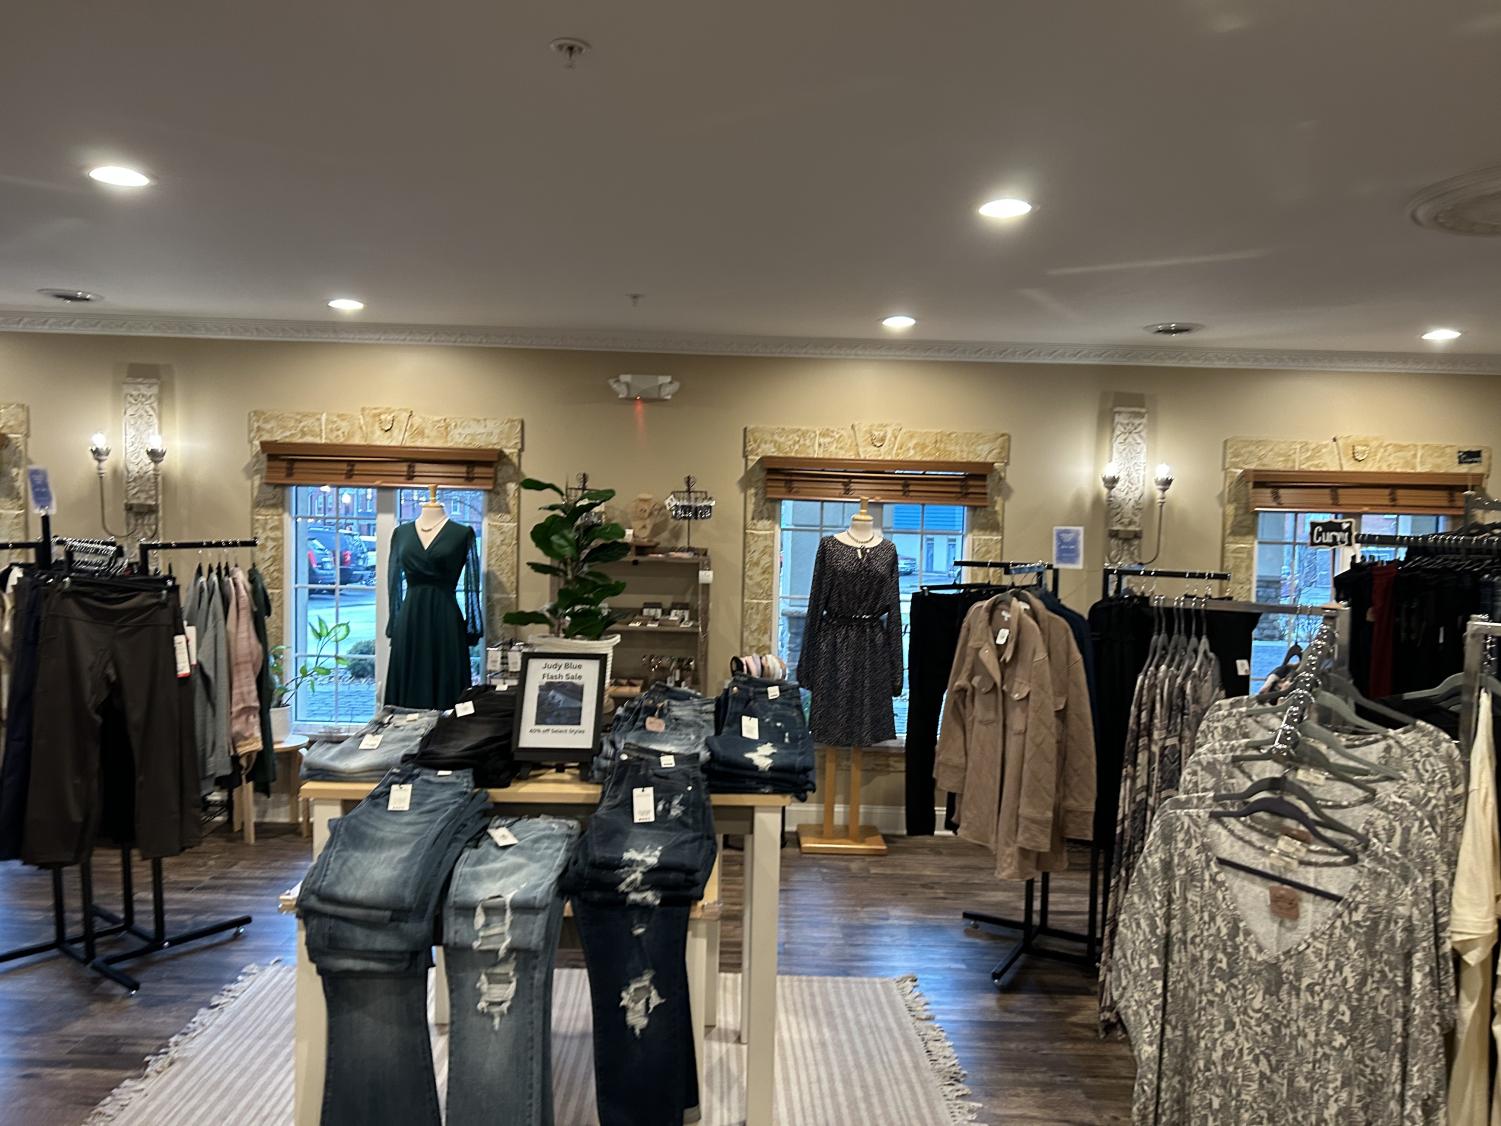 This is what the inside of the Humble & Kind Boutique looks like. They have clothes, jewelry, shoes and much more! The ladies that work here are very kind and helpful. The boutique is located in the Graystone Grande Palazzo.